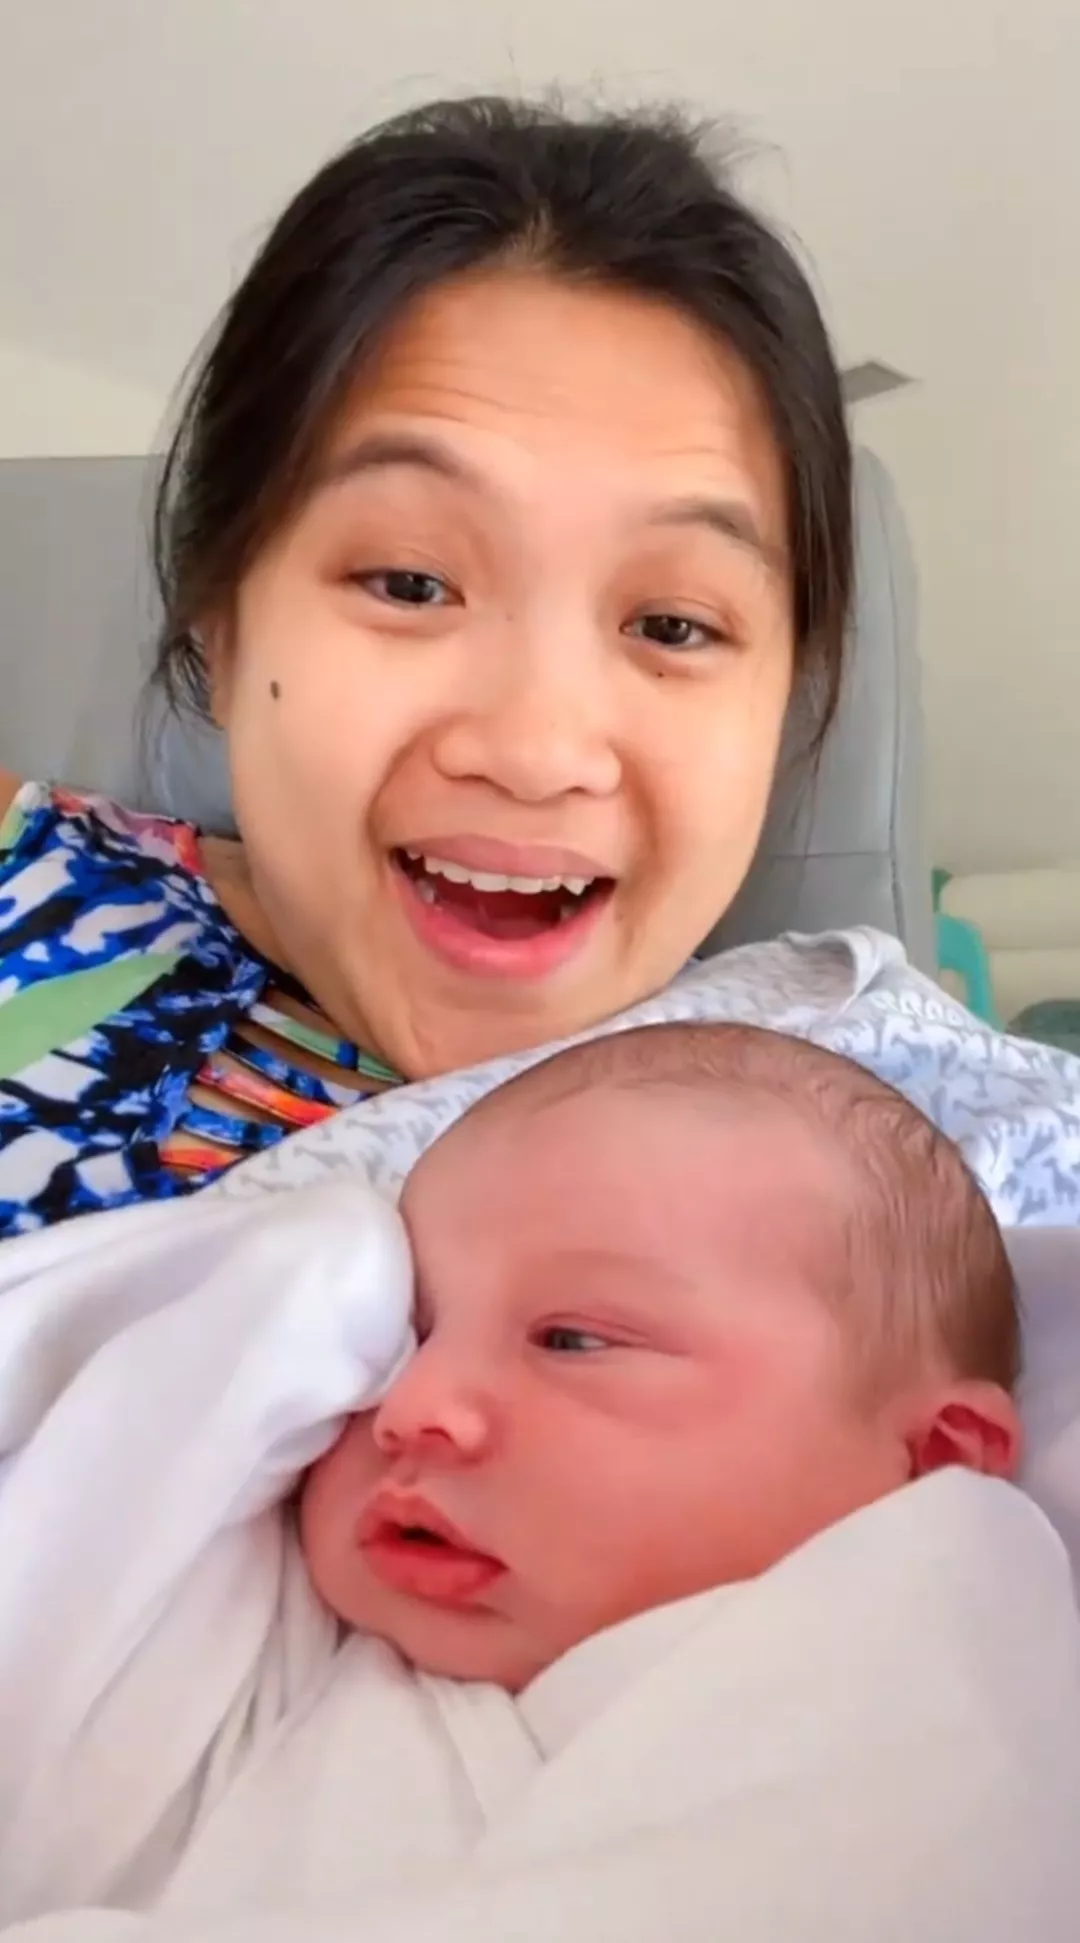 inday roning with her new born baby in hospital